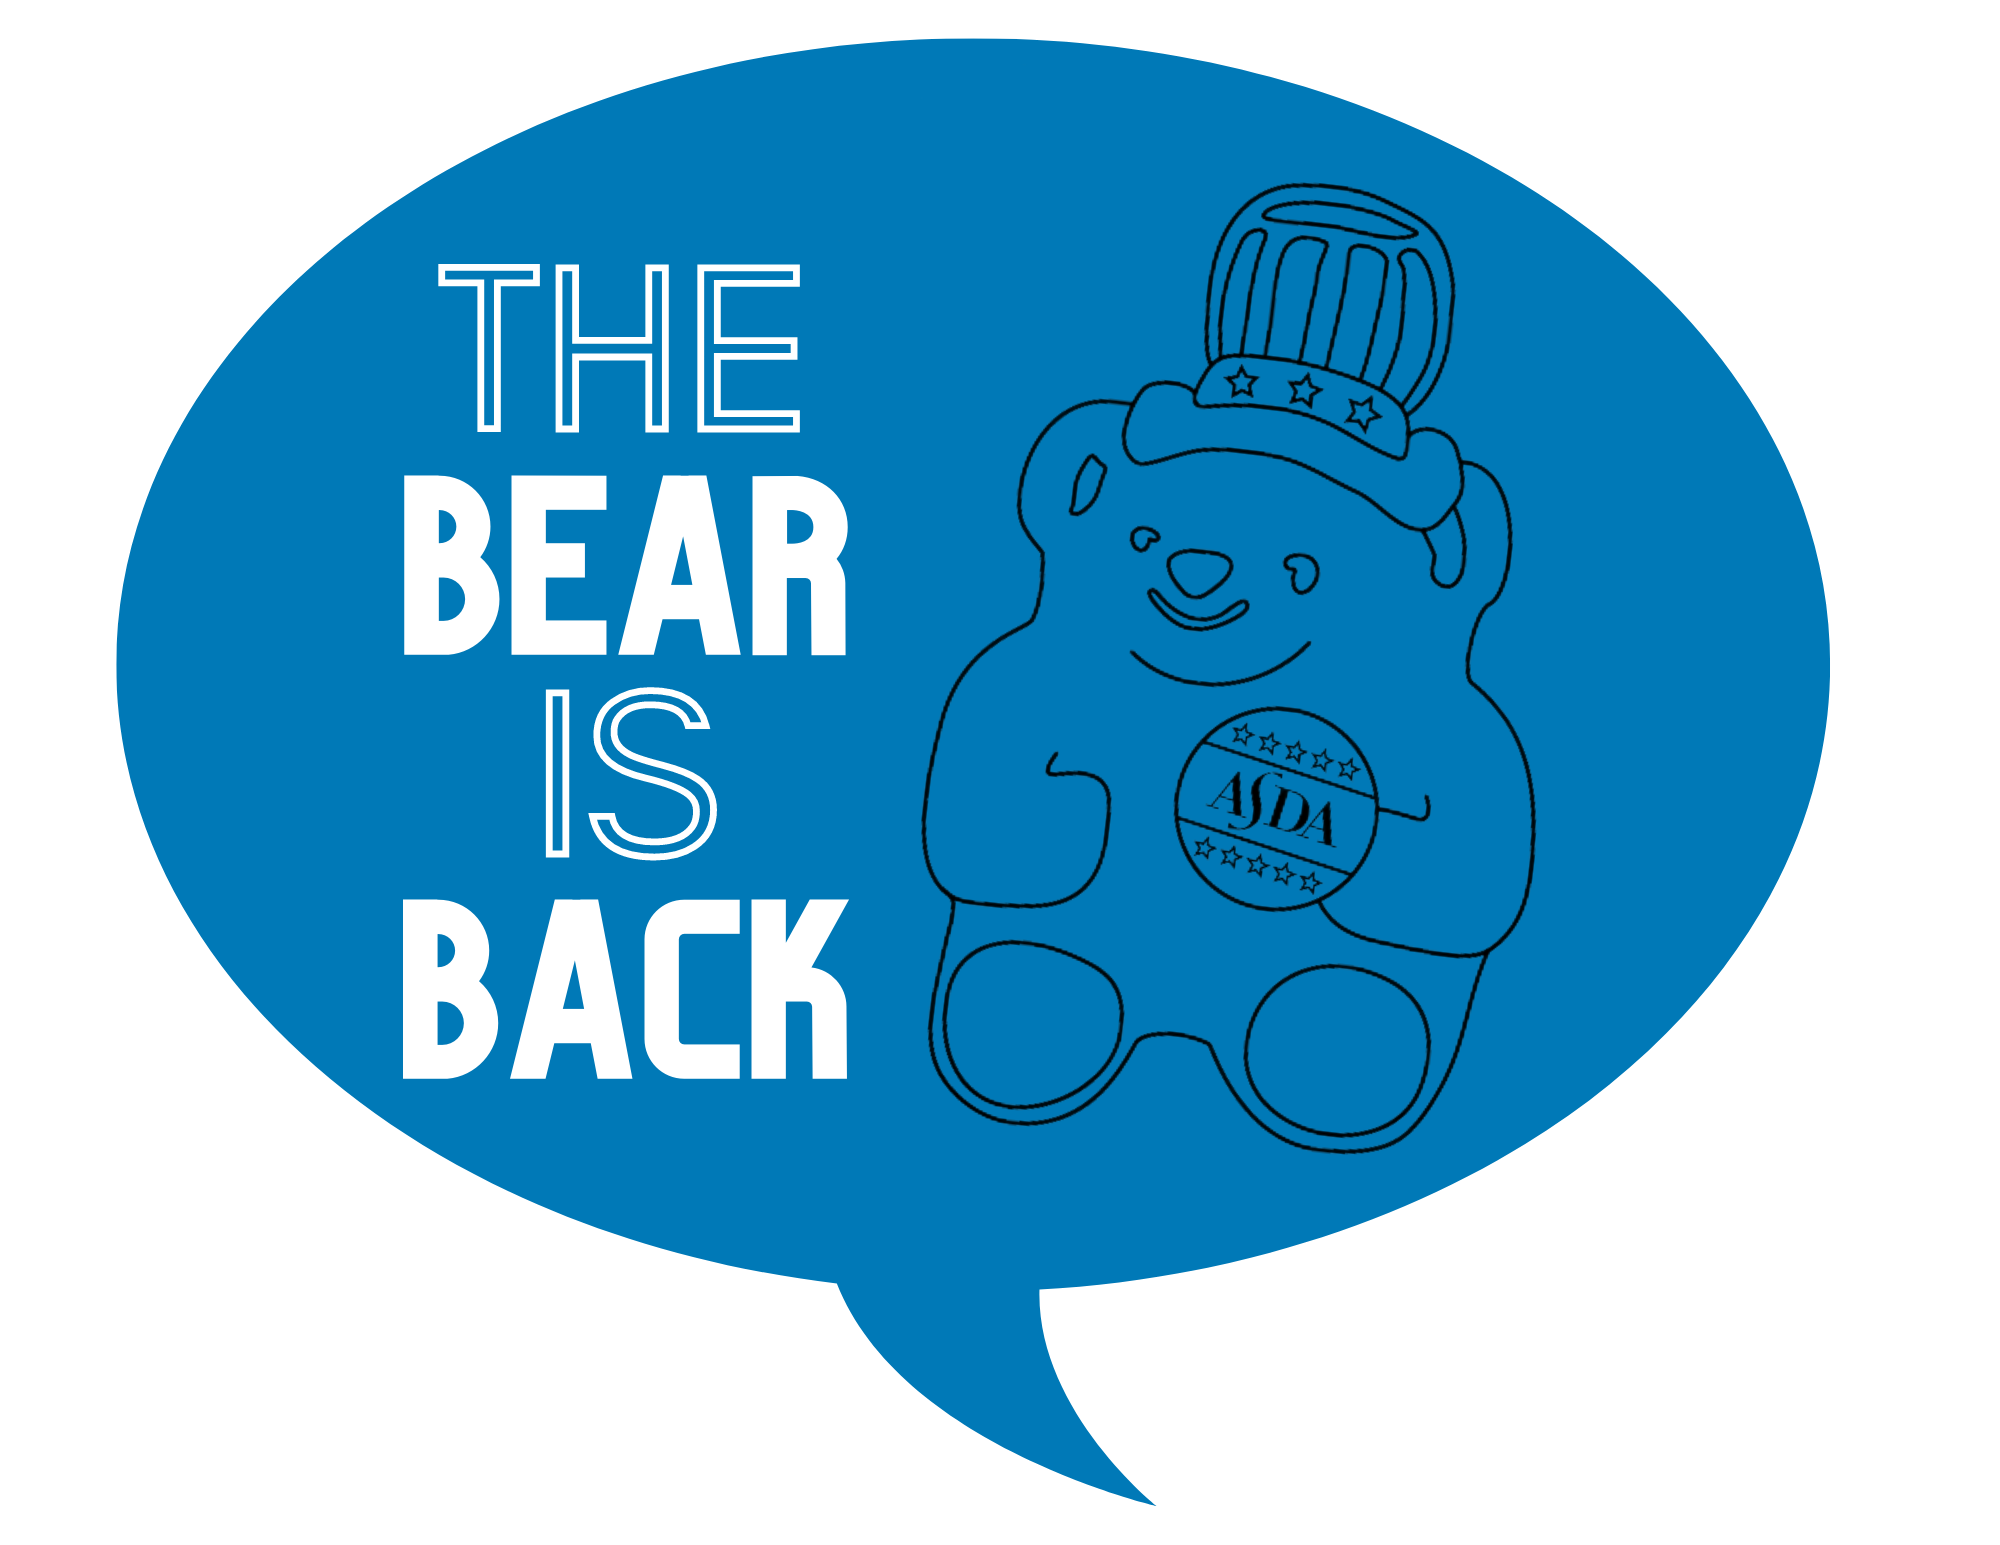 The Bear is Back